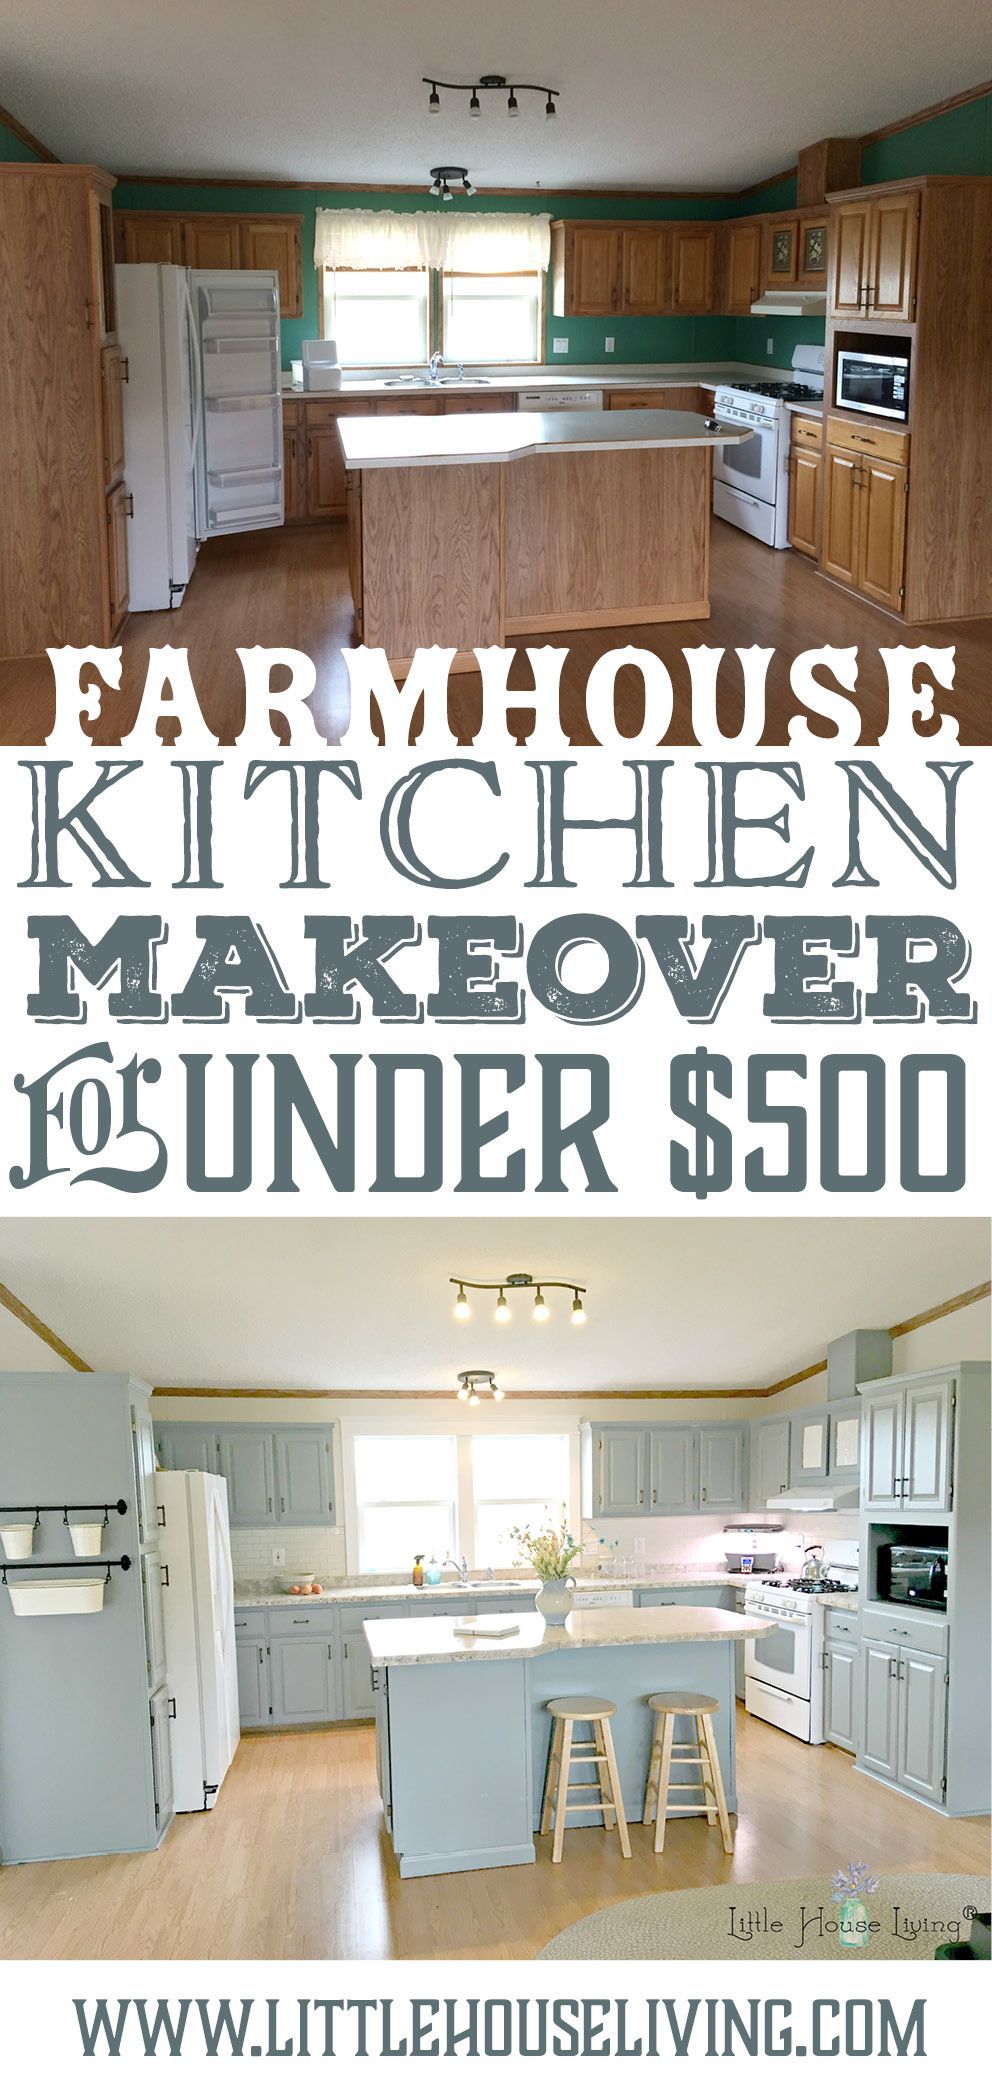 Complete Frugal Kitchen Makeover for Less Than $500 - Complete Frugal Kitchen Makeover for Less Than $500 -   14 diy House updates ideas